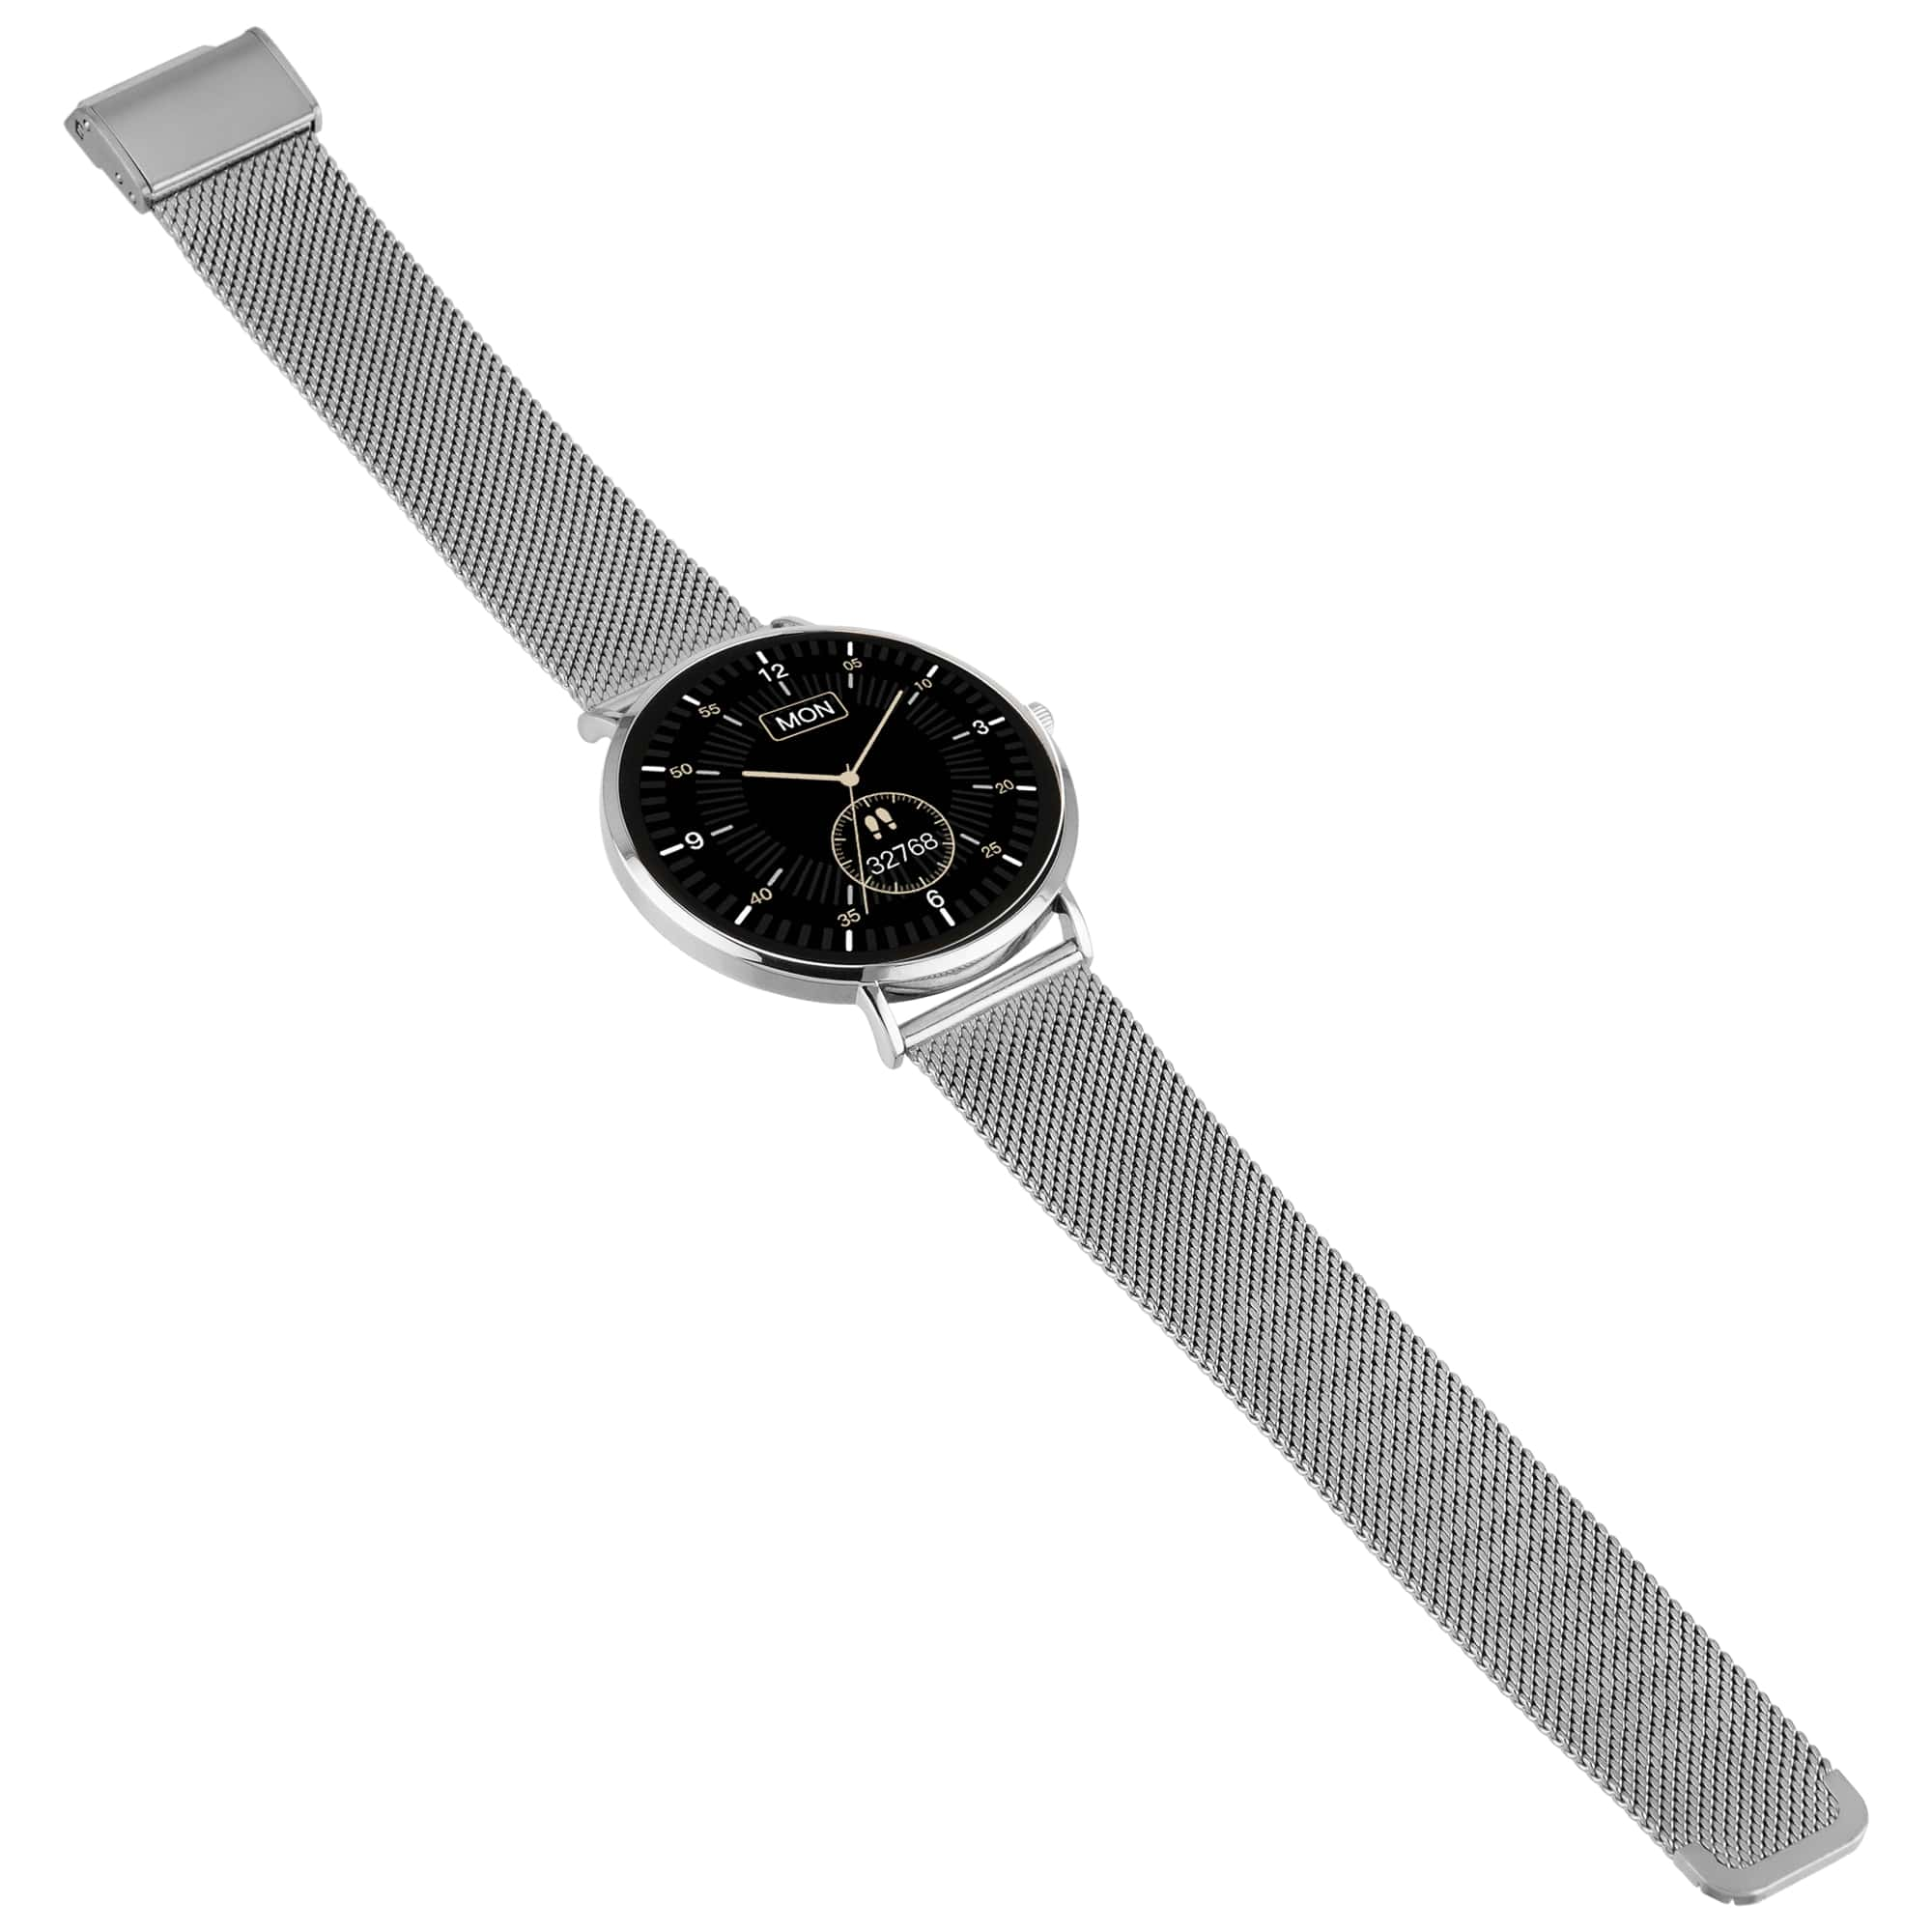 XCOAST SIONA 2 Silver TOPAS 140 galvanisiertes SILVER Topas - - Smartwatch mm, Steel, Stainless 210 Metall